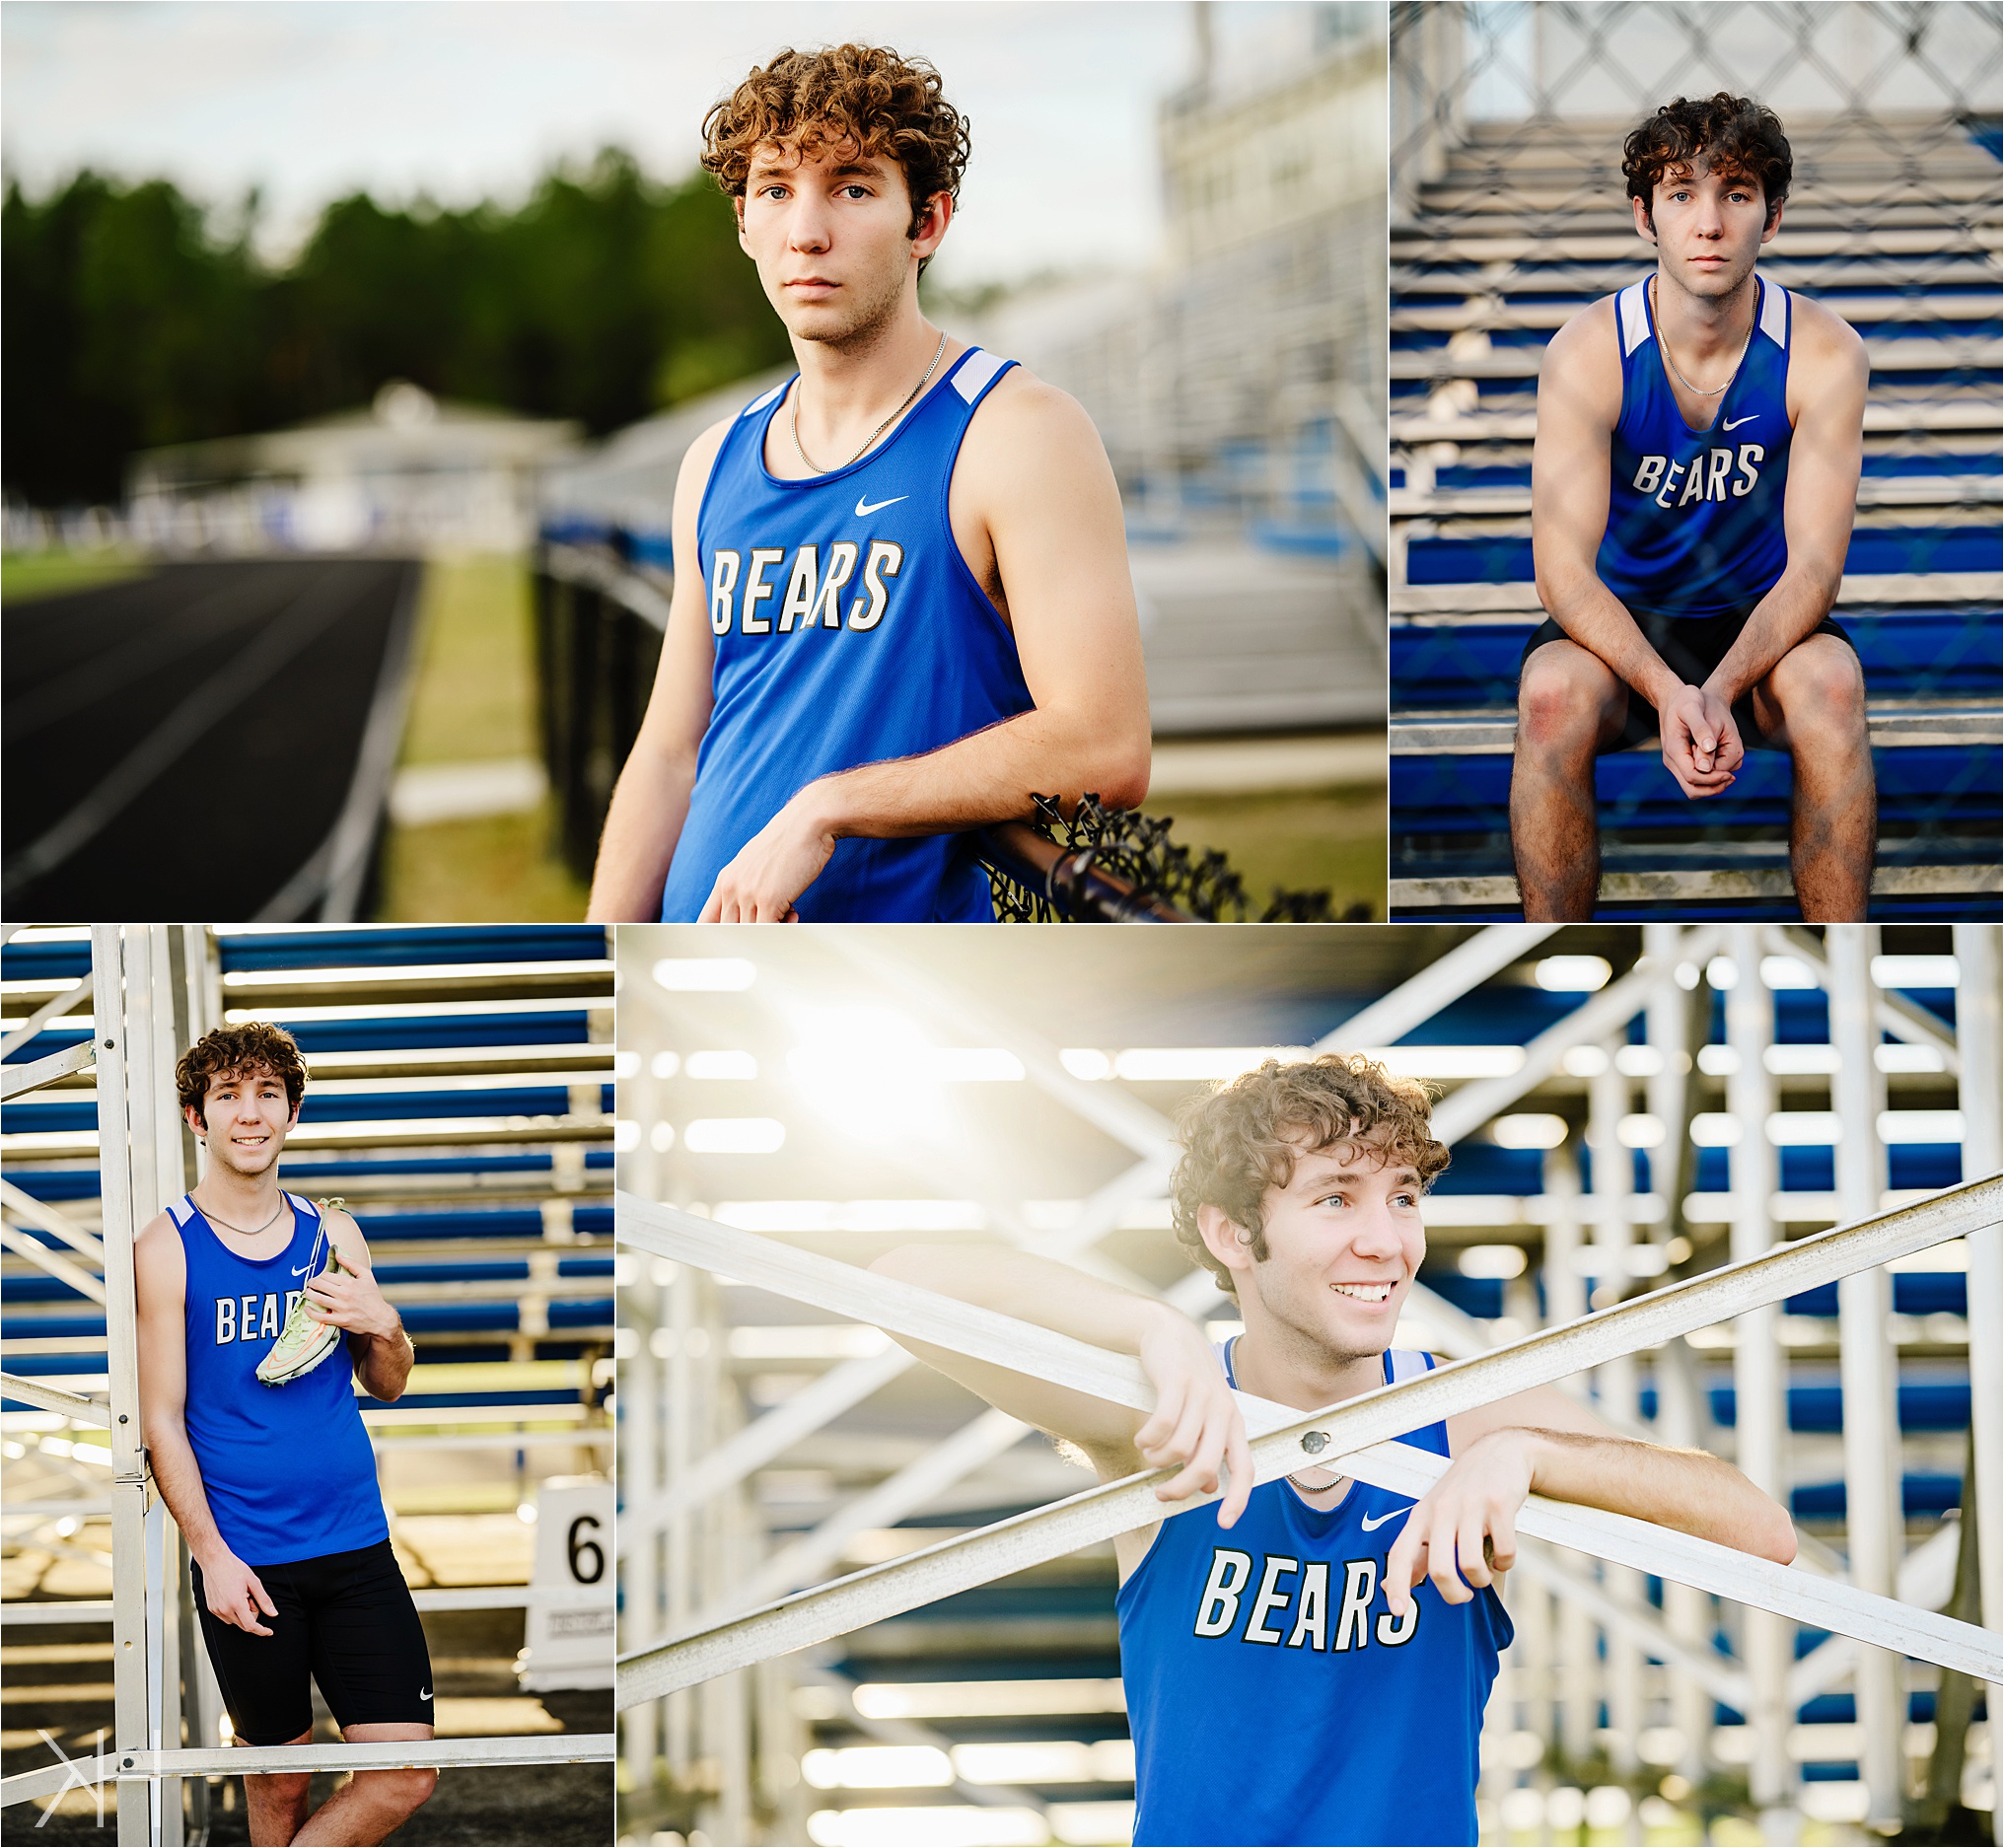 Track and Field senior photos in a stadium